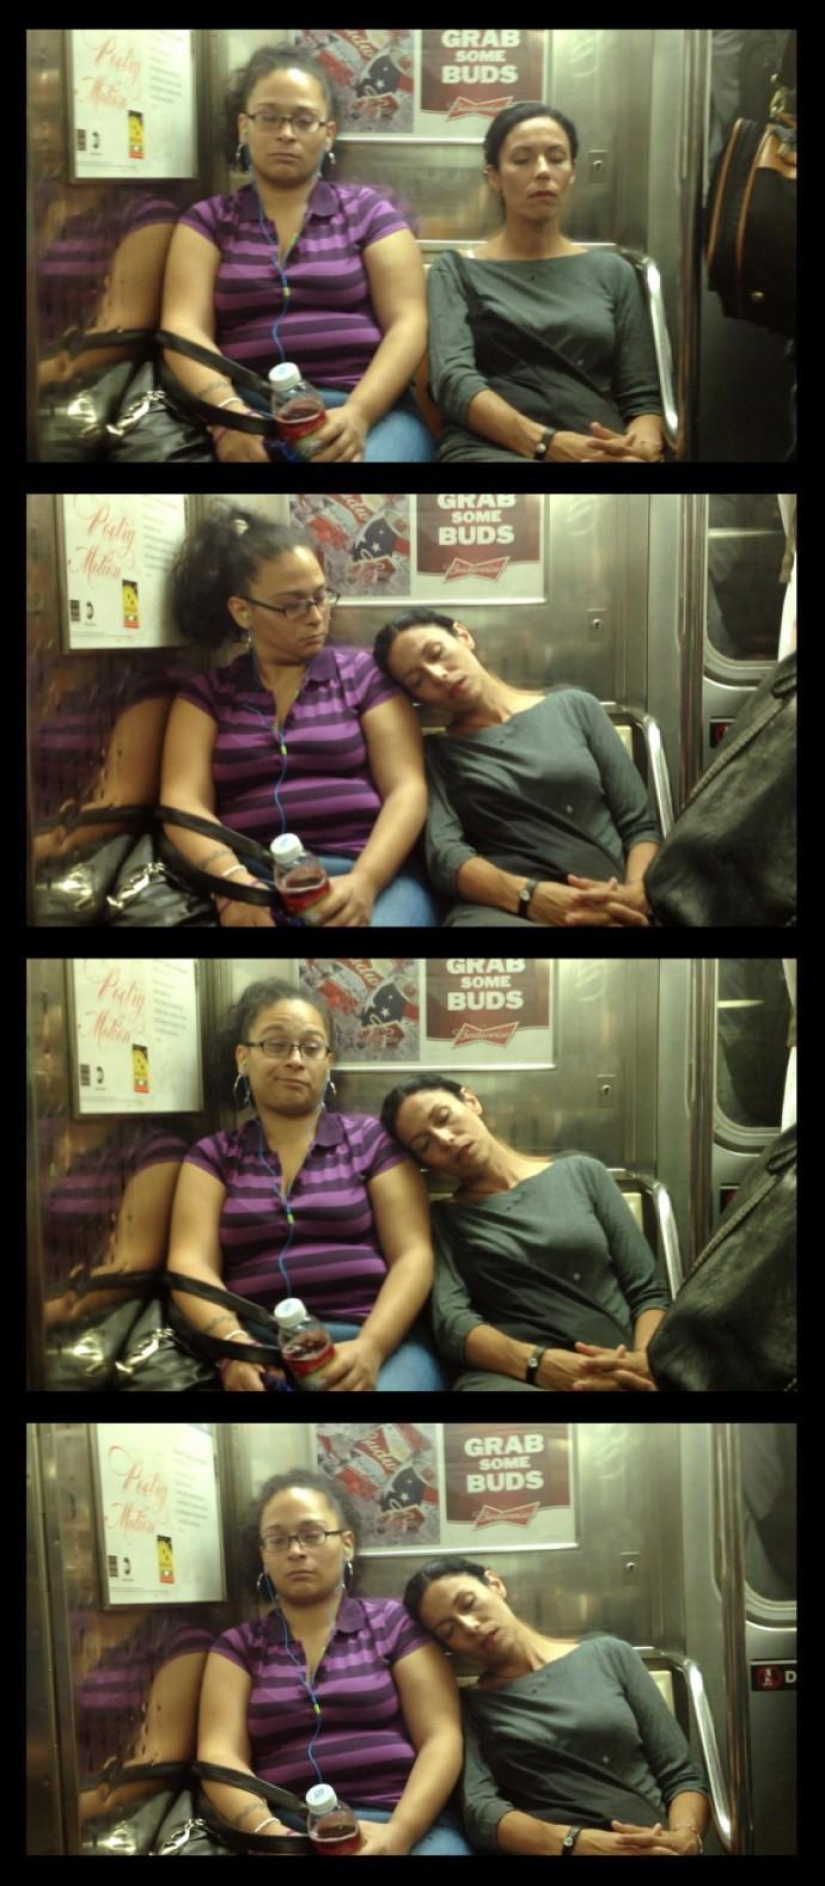 Curious photos of the sleeper passengers in the subway